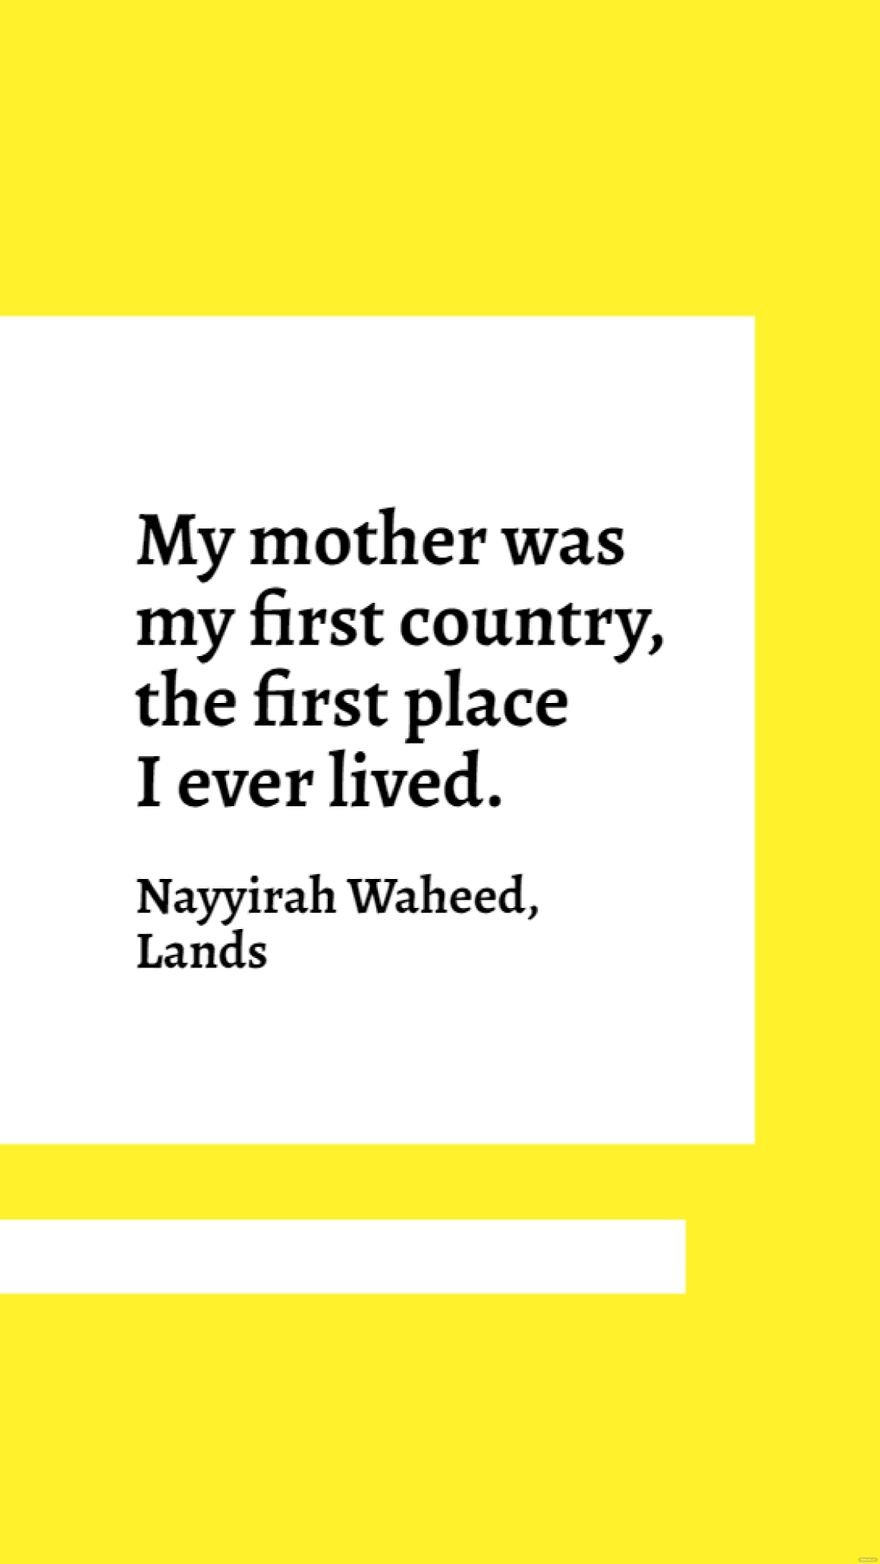 Nayyirah Waheed, Lands - My mother was my first country, the first place I ever lived.